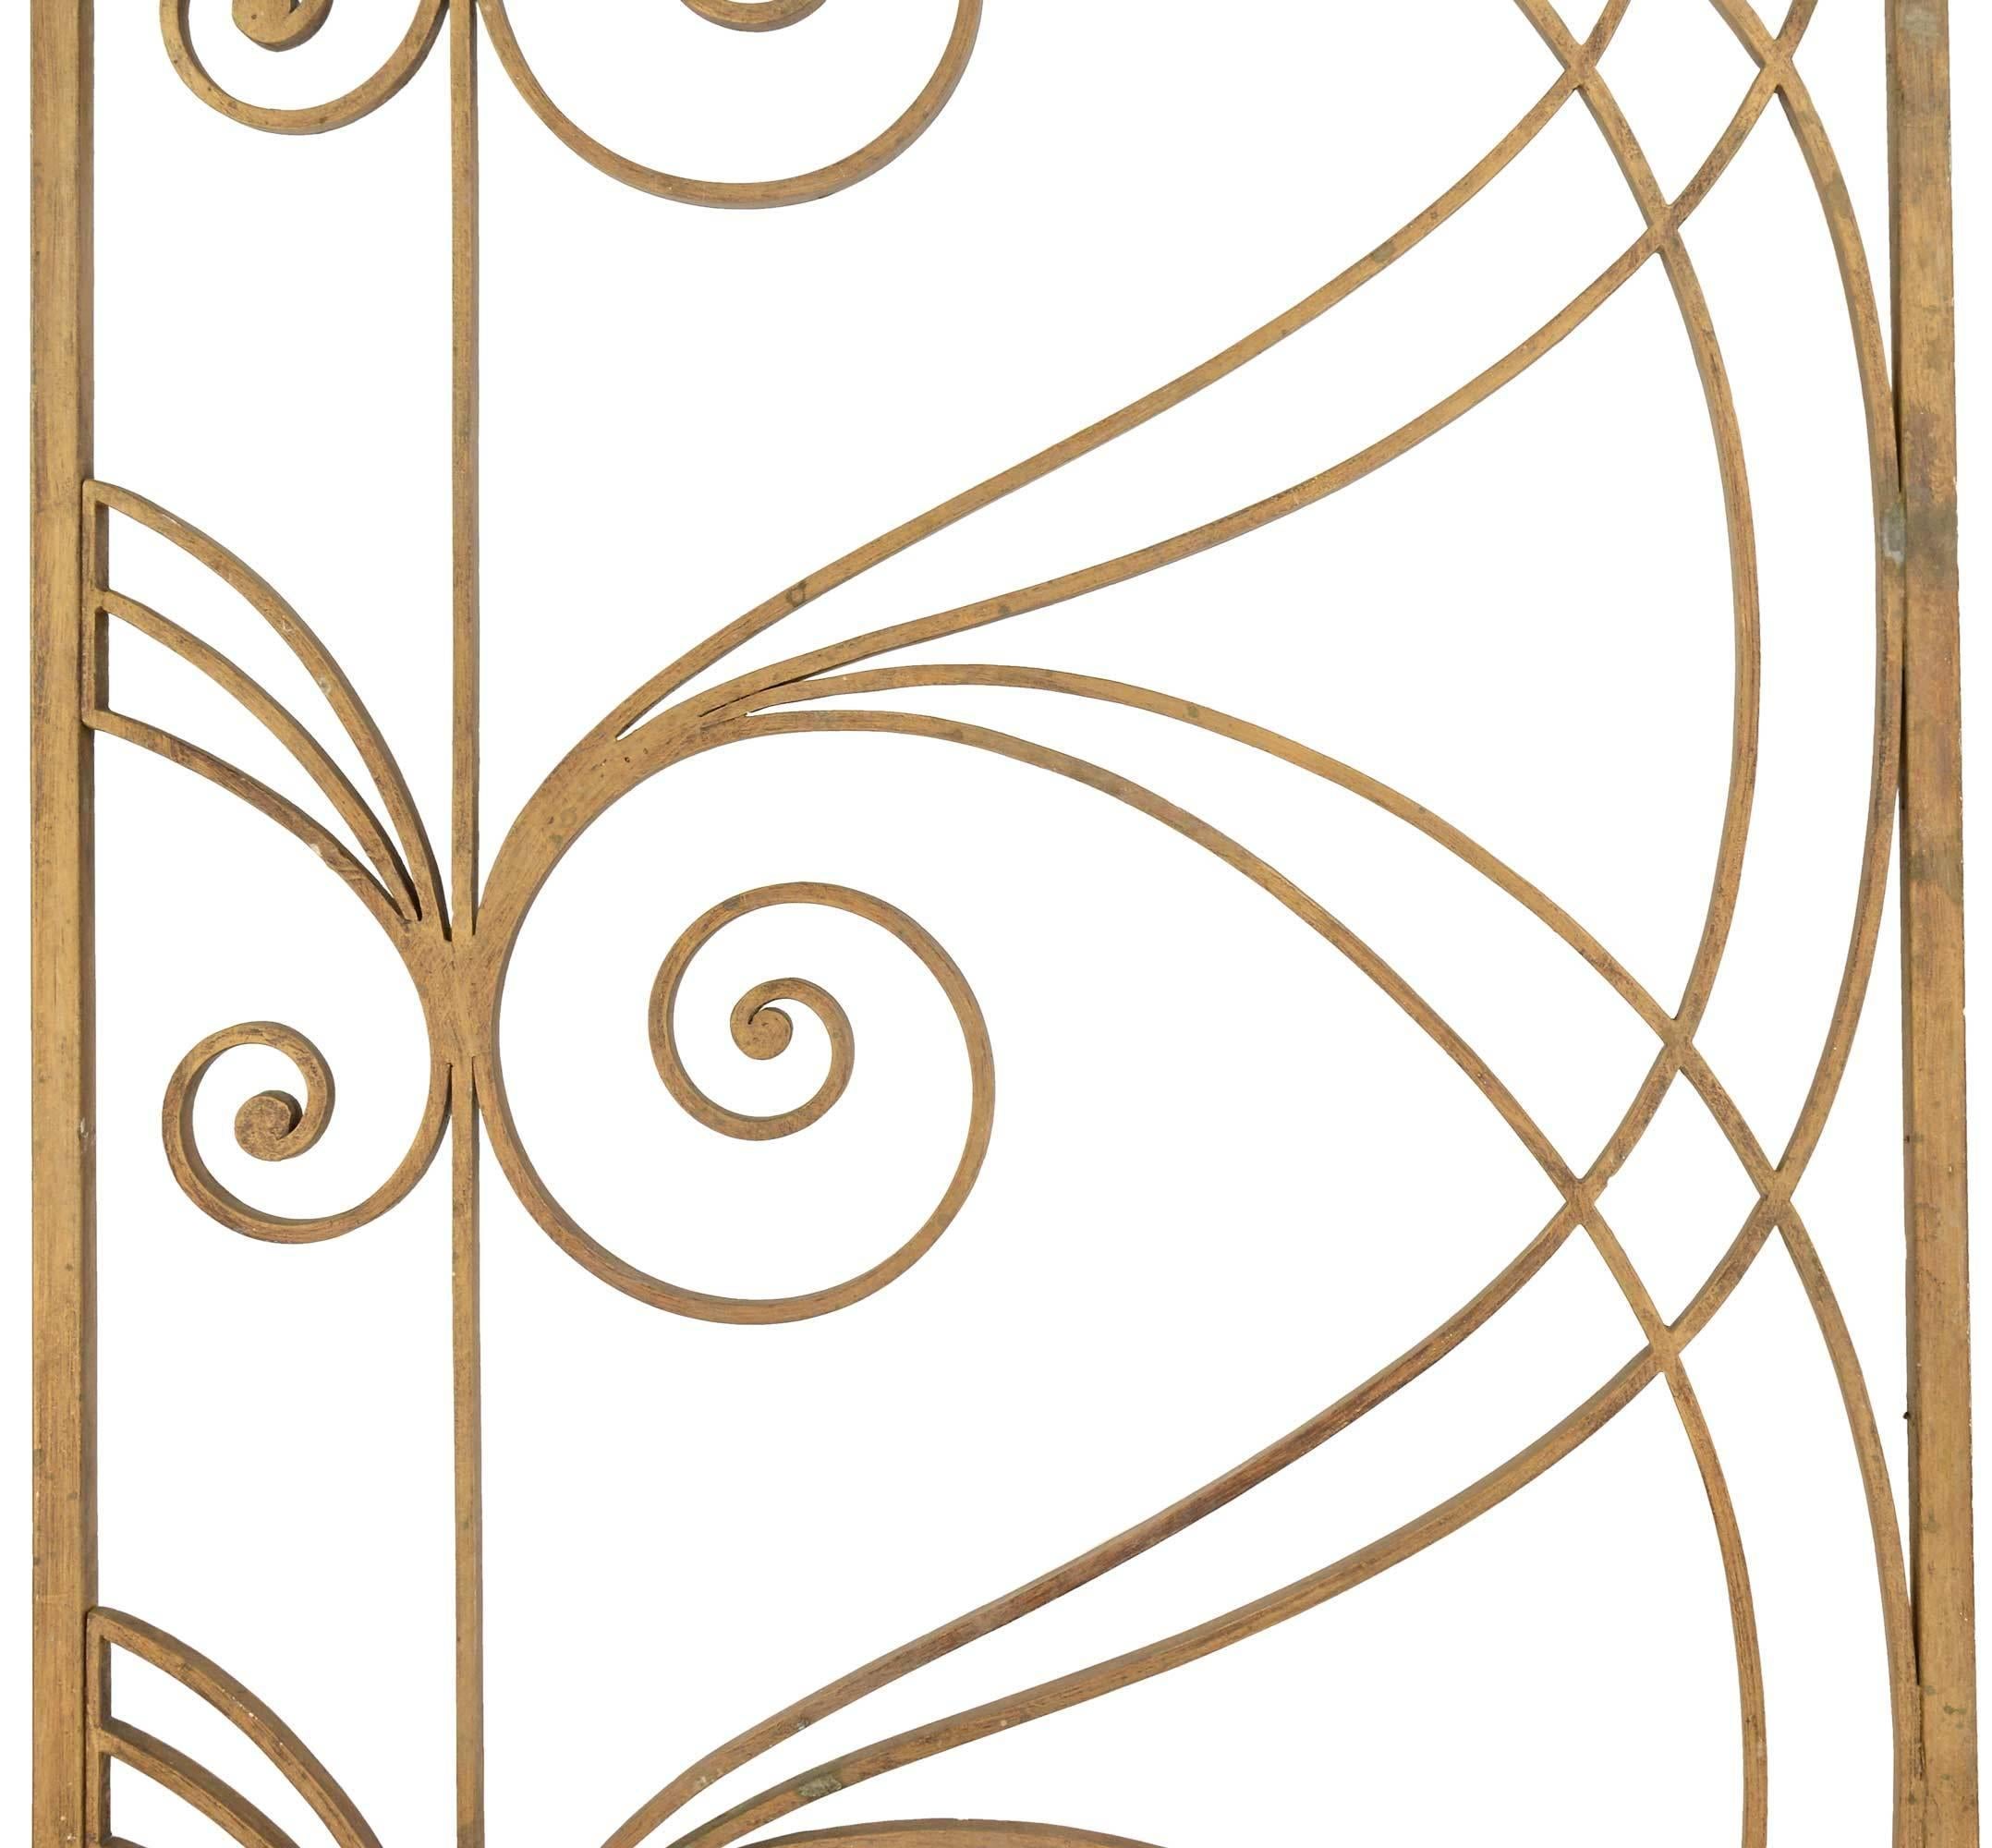 Stunning room divider made from three gold painted decorative scrolling iron panels. Perfect for in-home use, or as a lavish garden decoration.

Overall dimensions: 215.75